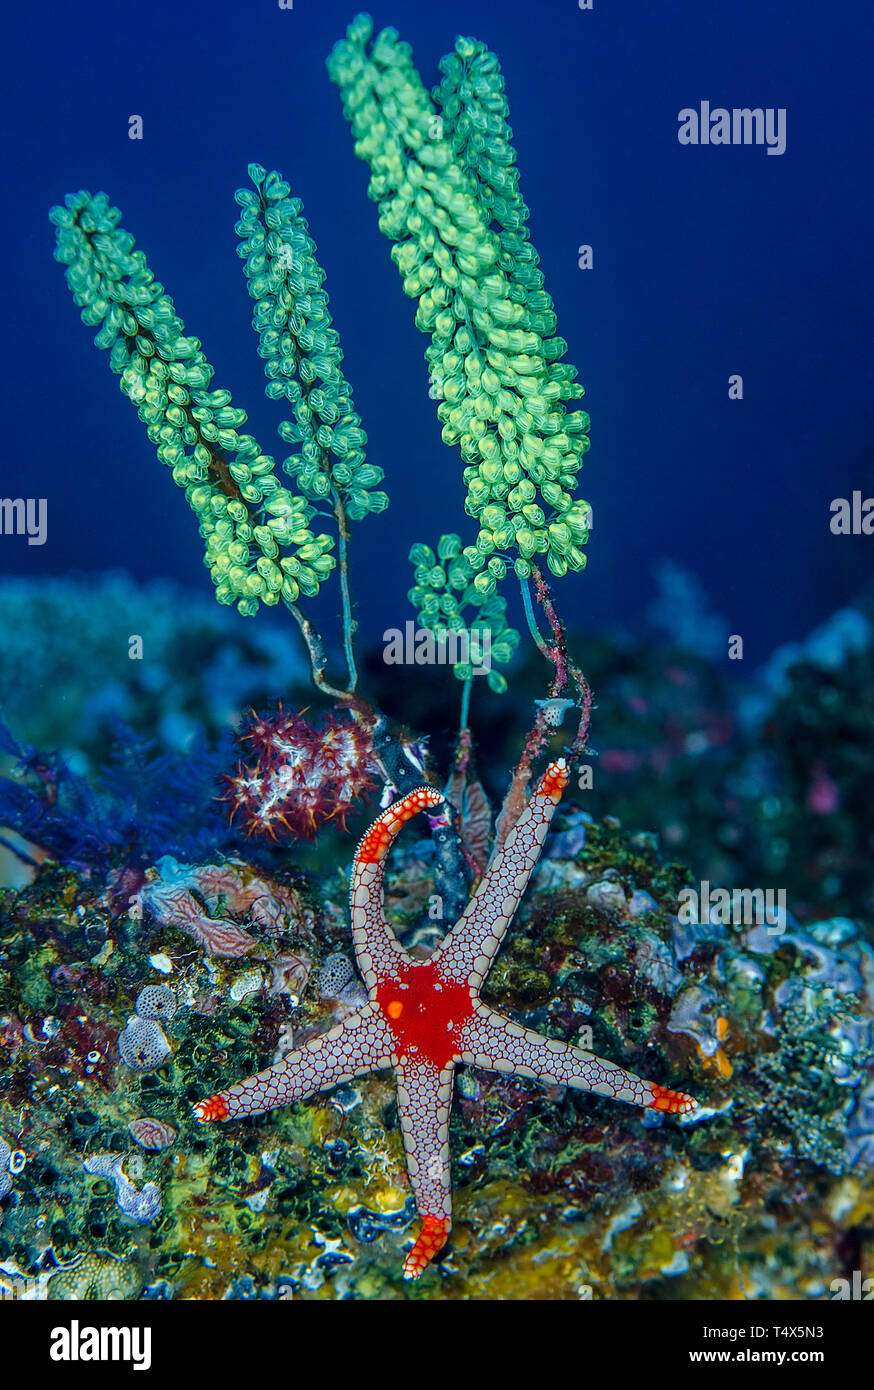 Marine 'still' life with colonial tunicates and sea star Stock Photo